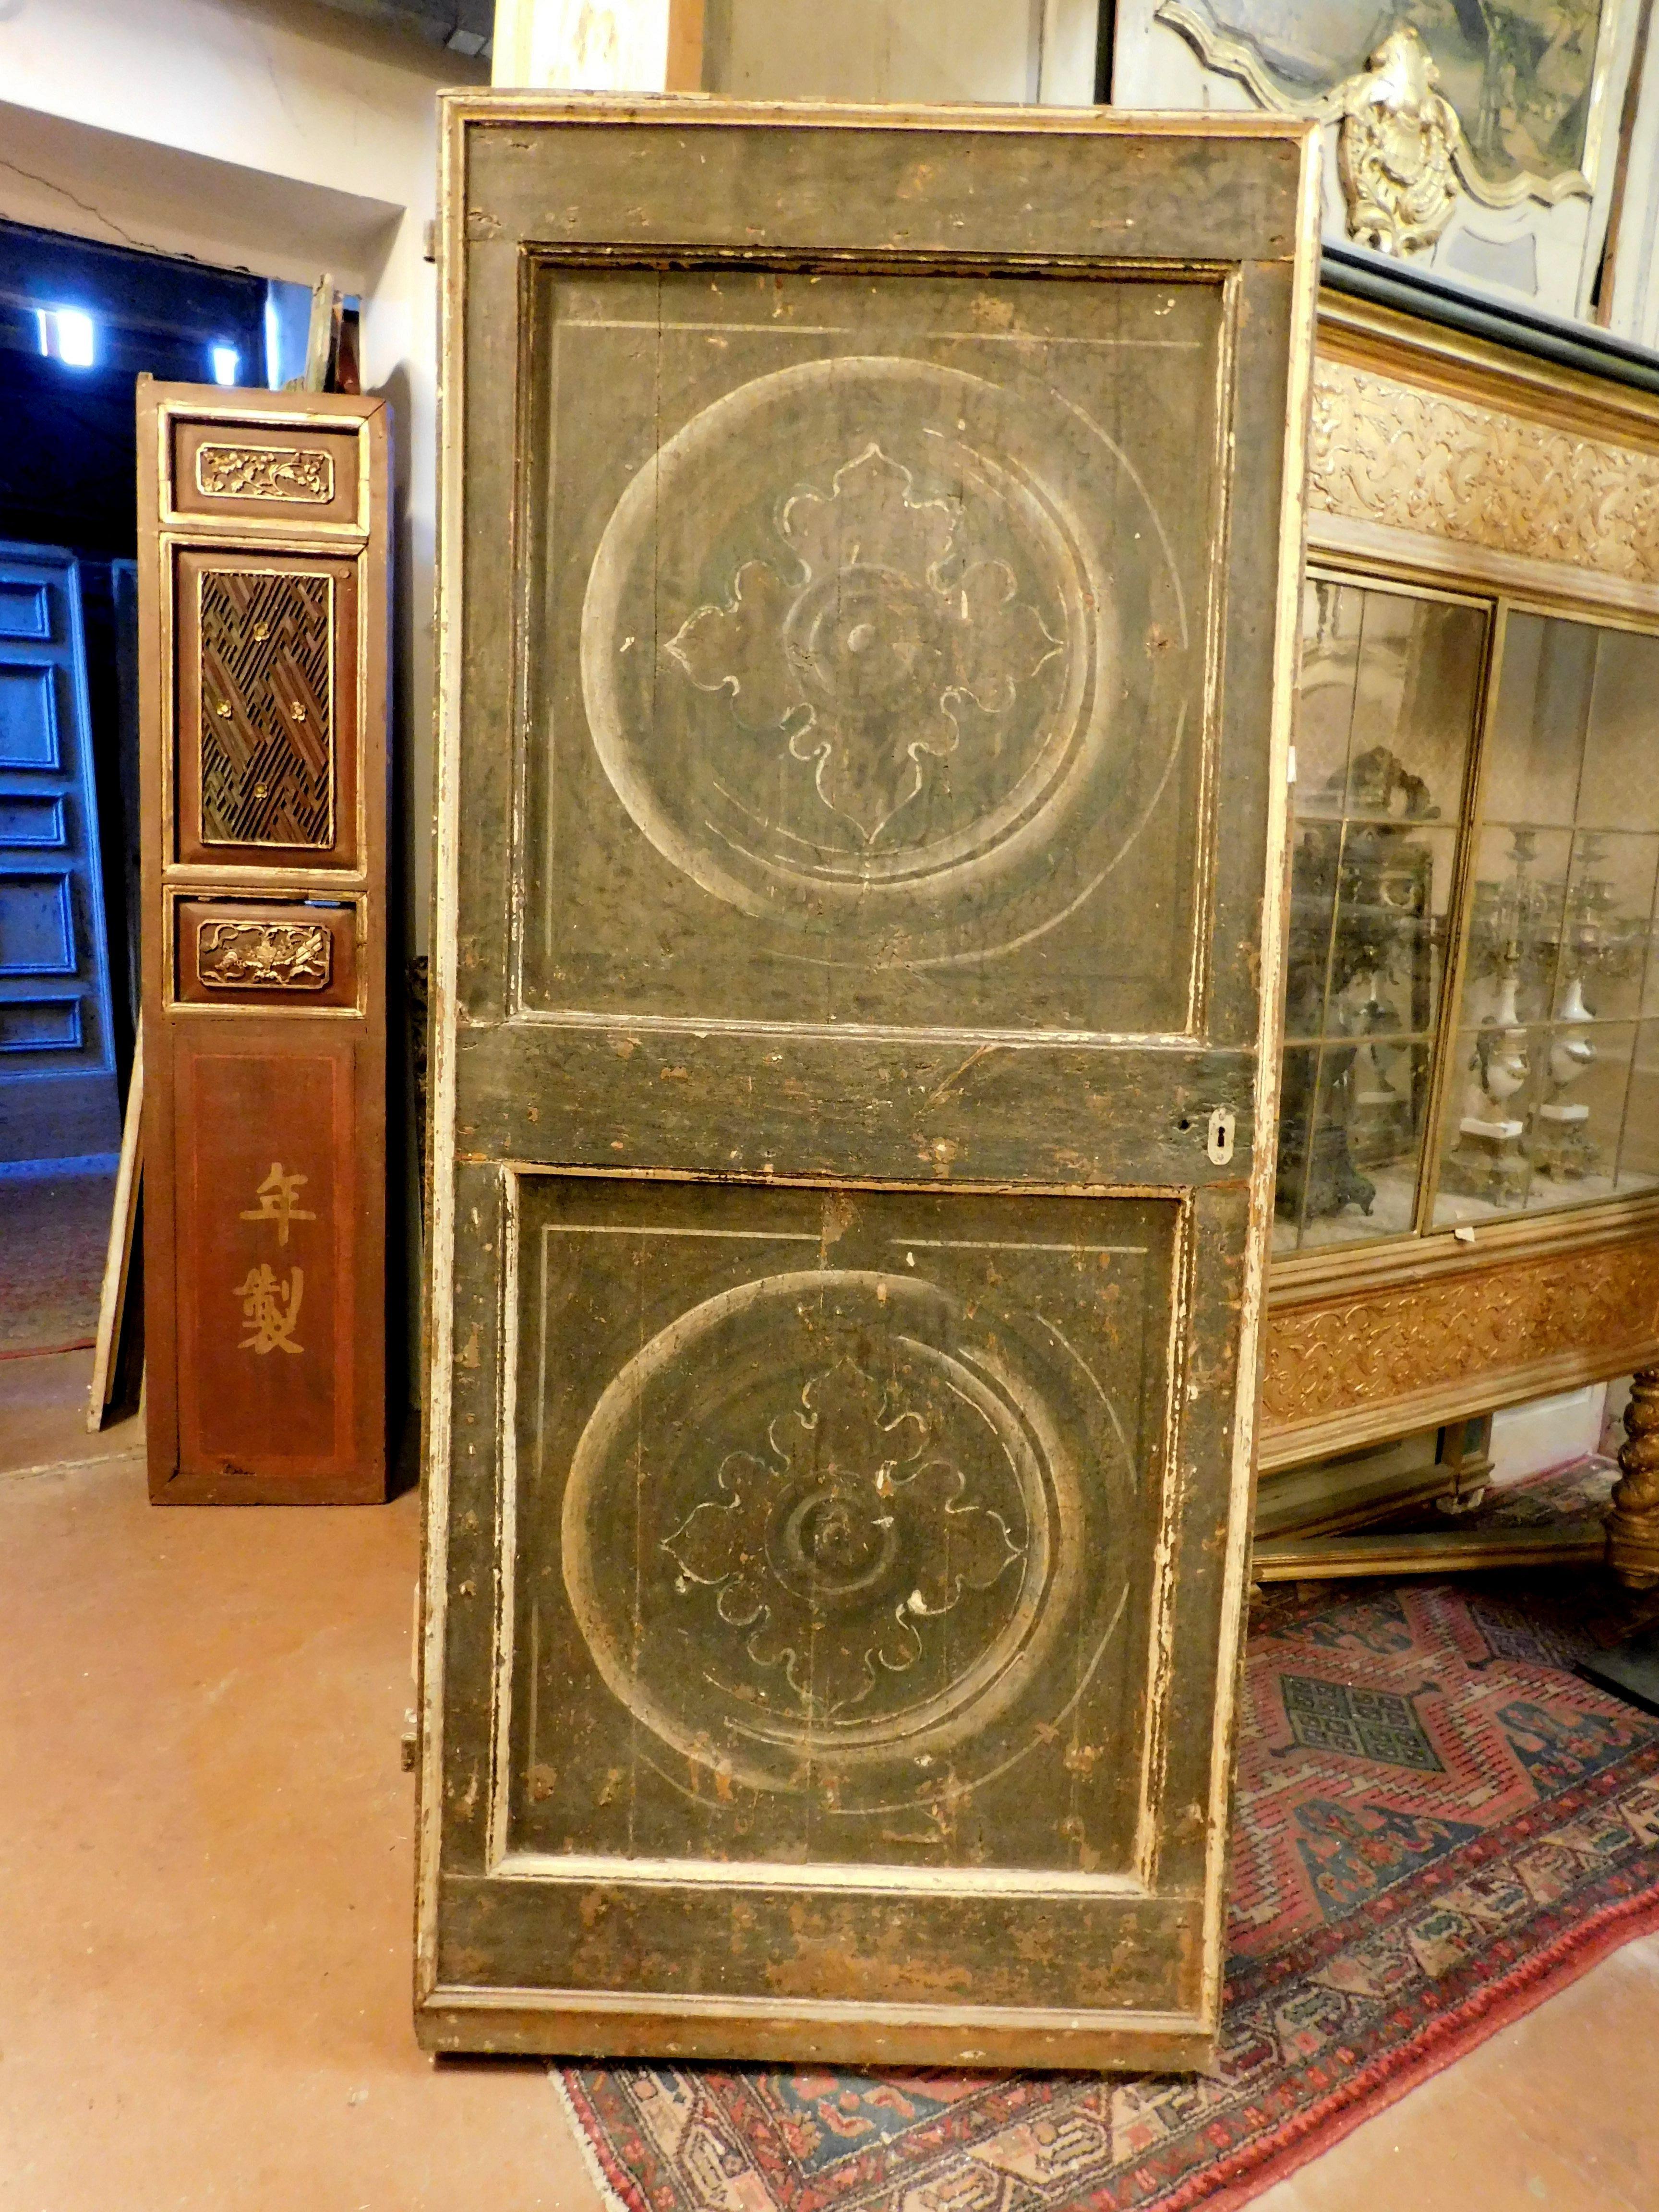 Ancient painted and lacquered single door, lacquered with black and white tones and central painting, without frame but with rebate, therefore possible with wall mounting, 18th century Italy.
maximum dimensions cm W 88 x H 203, light measurement